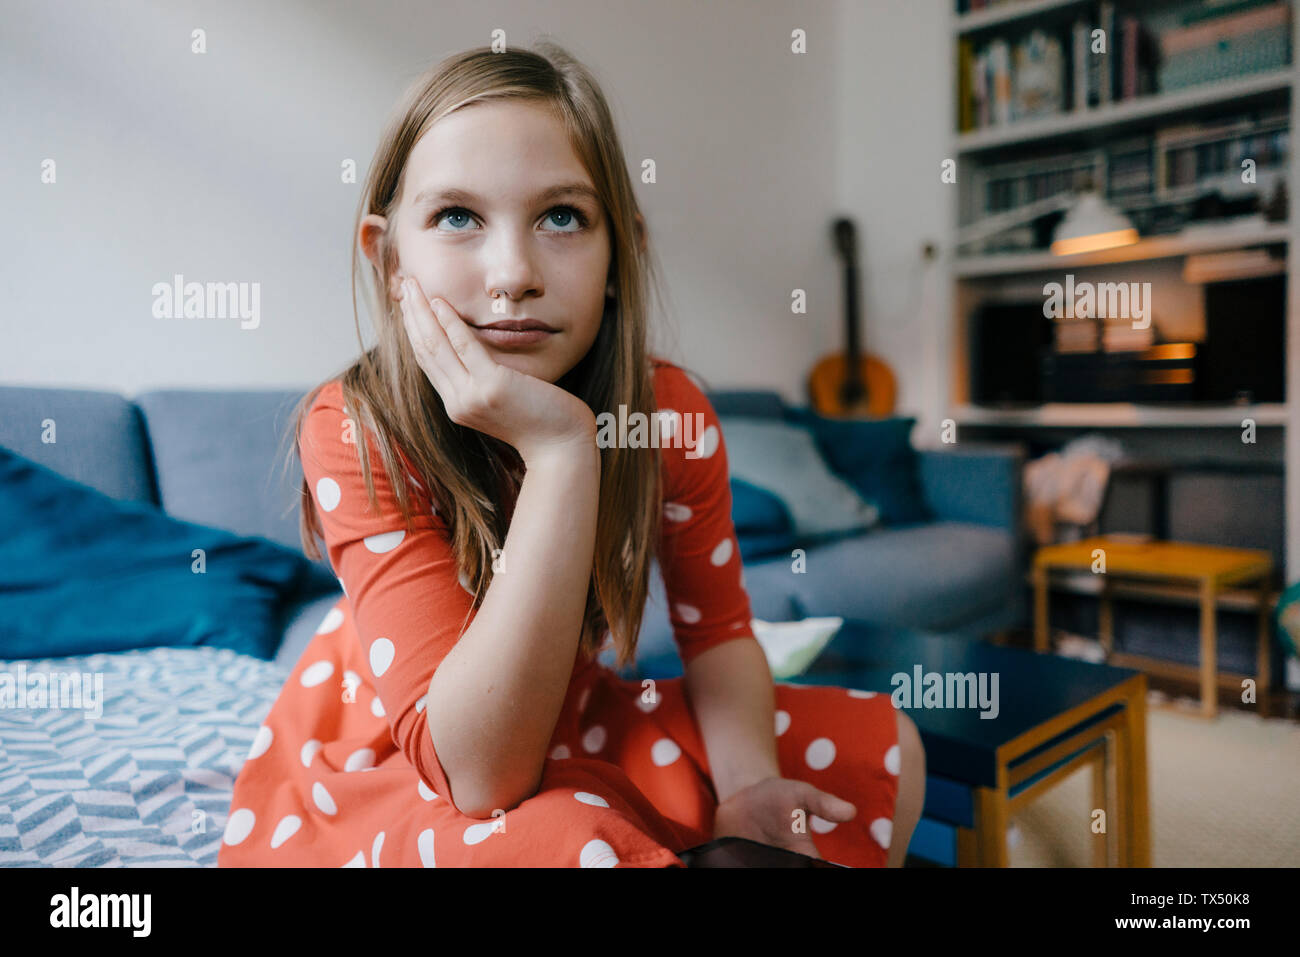 Portrait of serious girl sitting on couch at home Stock Photo